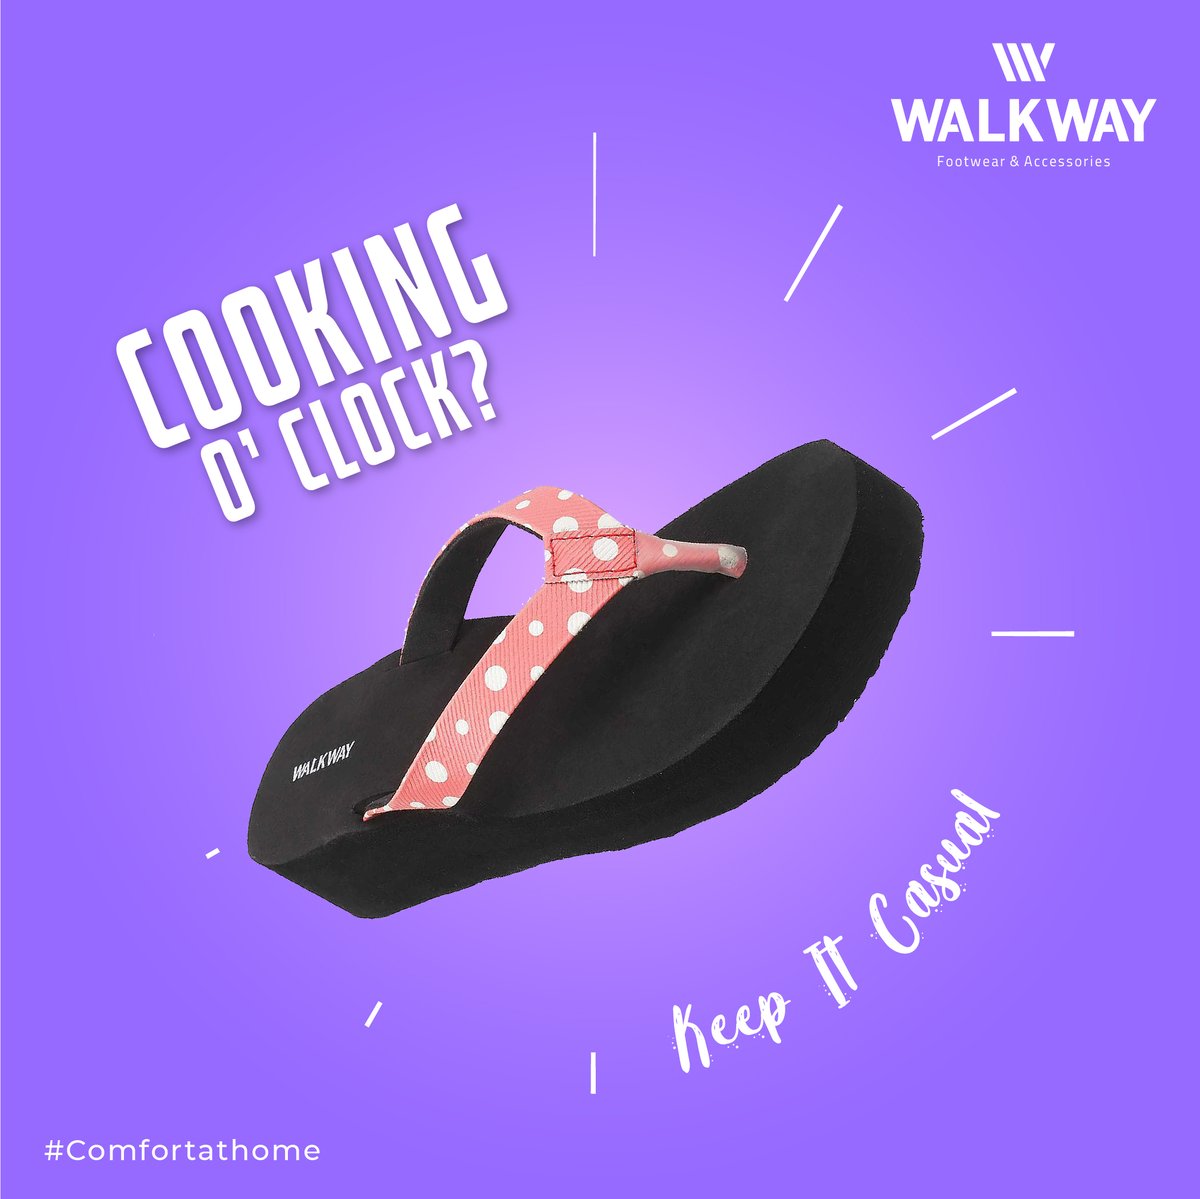 Switch on the cooking mode with ease and sheer comfort. 
To buy this pair visit :  bit.ly/3om9juS

#walkway #trendeveryday #home #chappals #casualwear #ladieschappal #trendyshoes #comfort #budgetshopping #newlook #lockdown #shopping #onlineshopping #slippers